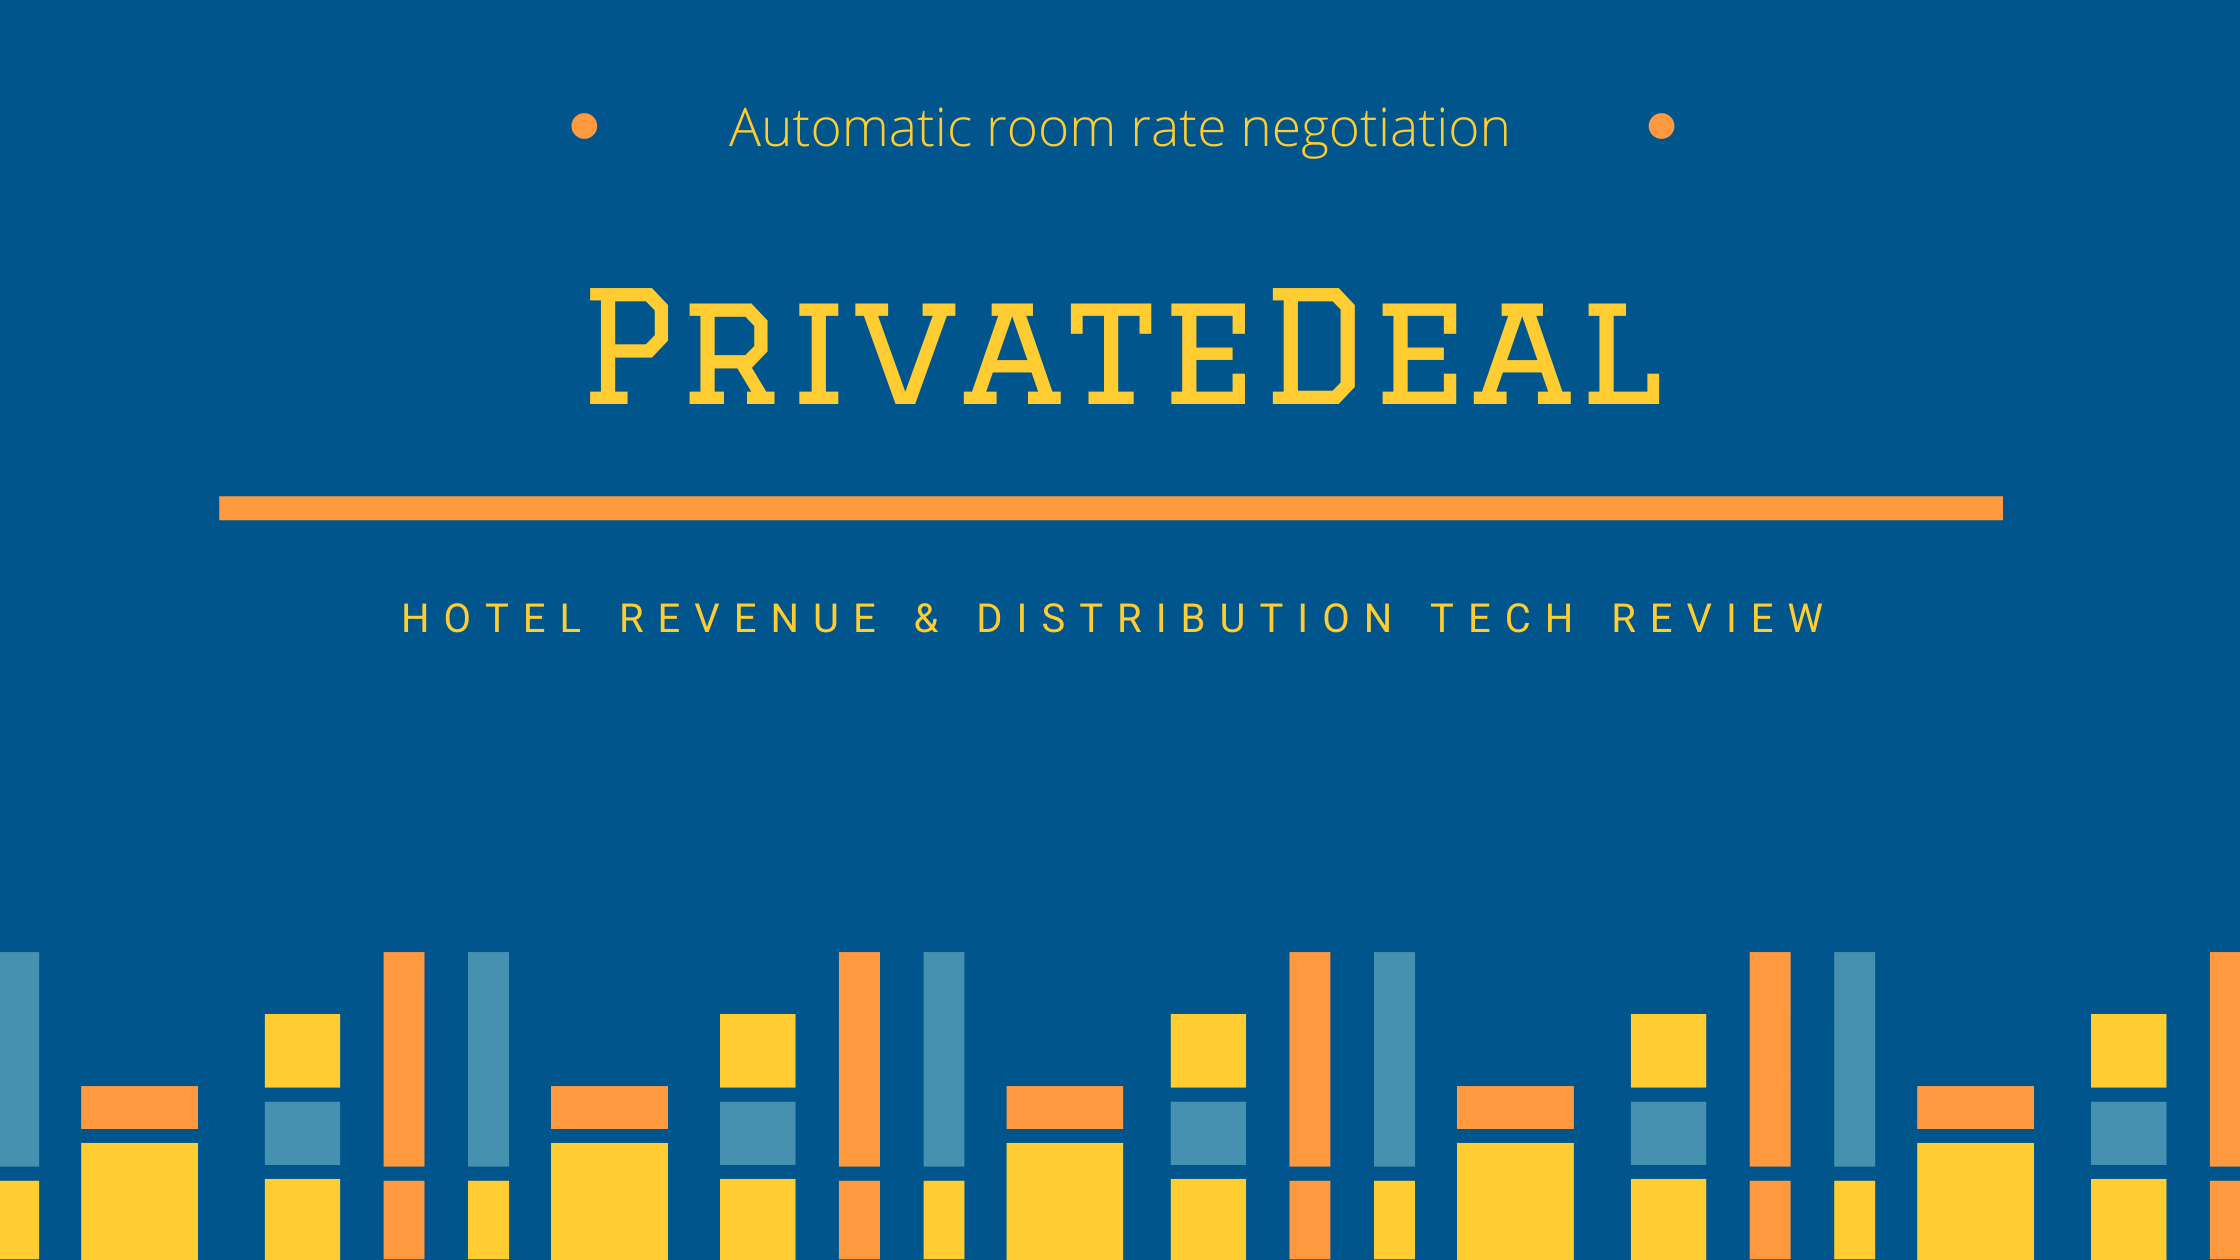 PrivateDeal - innovative booking solution allows guests to propose a price for a stay